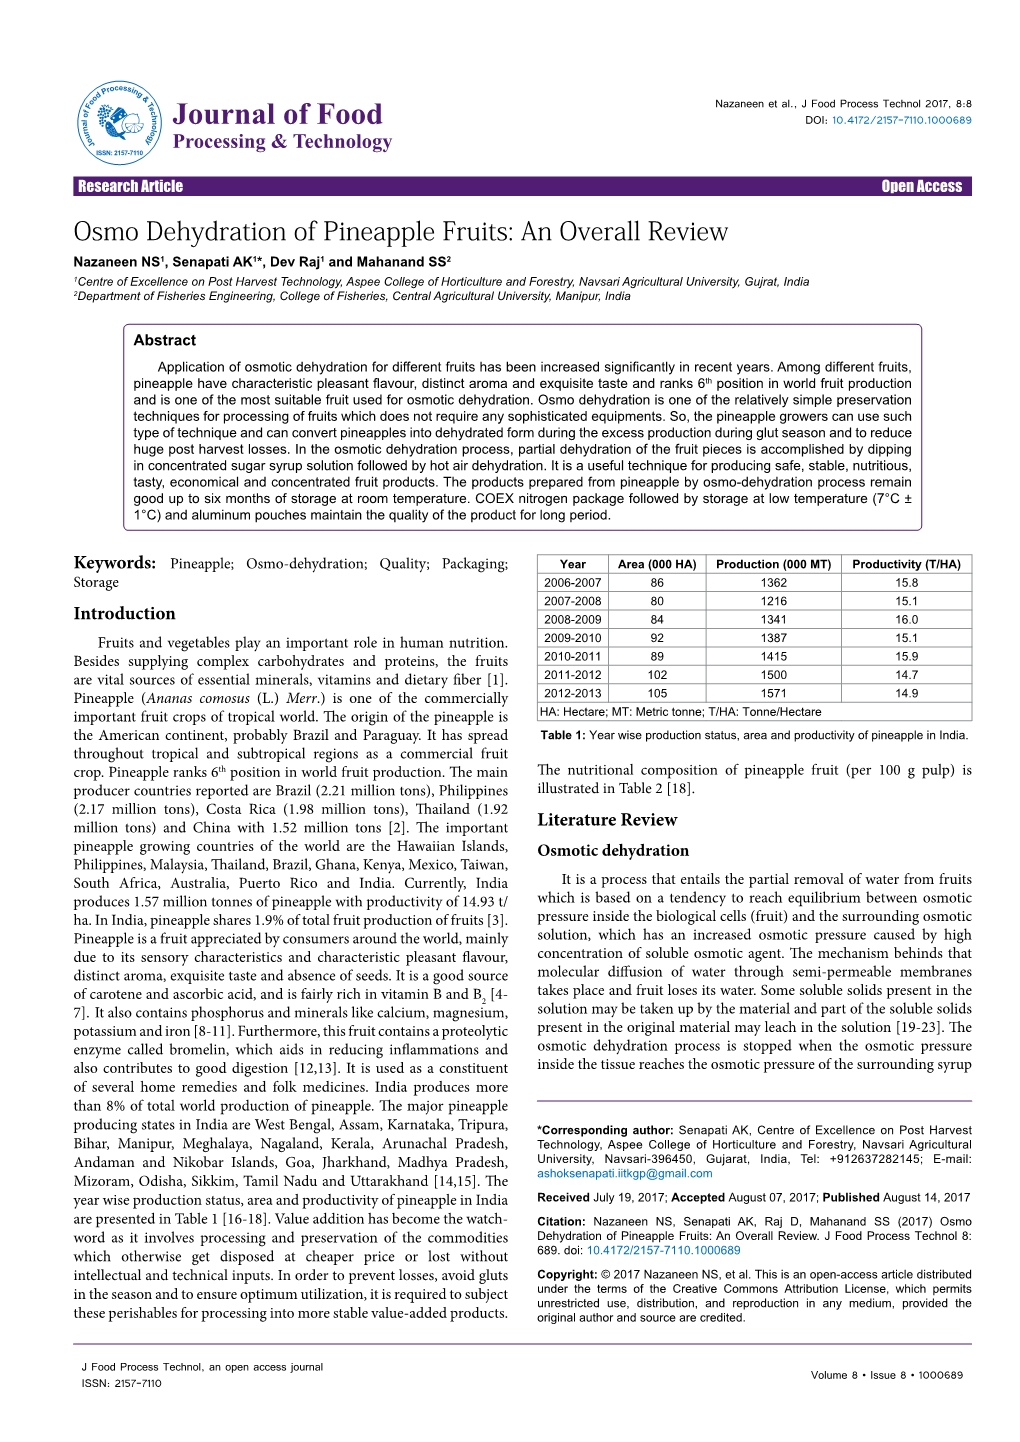 Osmo Dehydration of Pineapple Fruits: an Overall Review